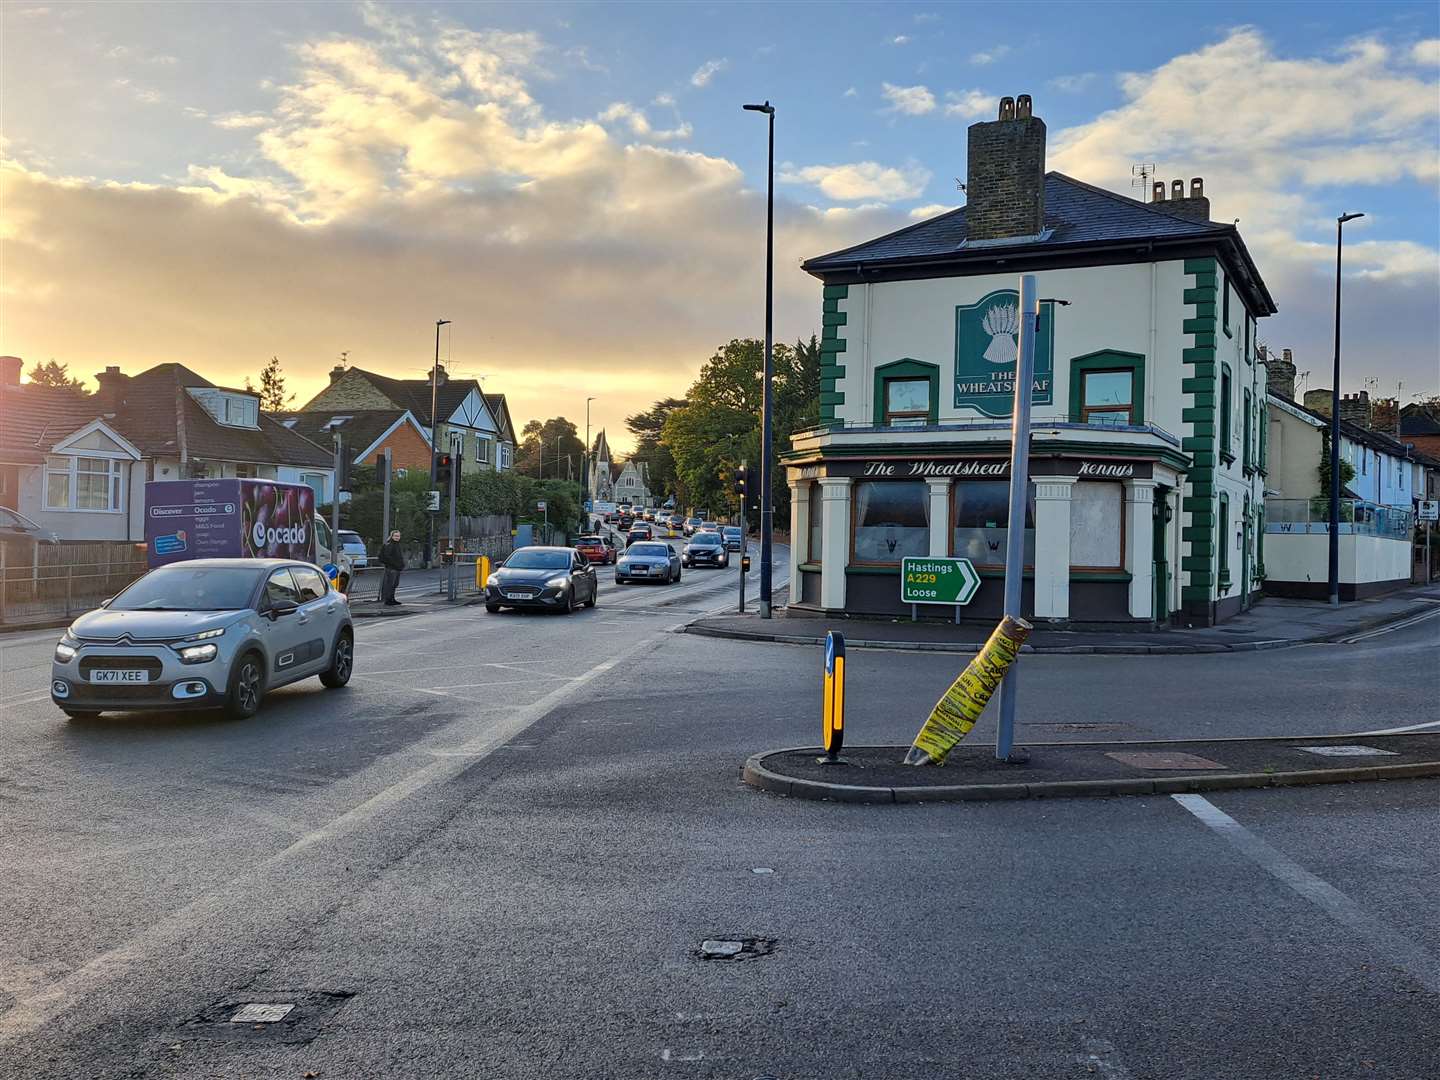 The Wheatsheaf junction is set to be transformed